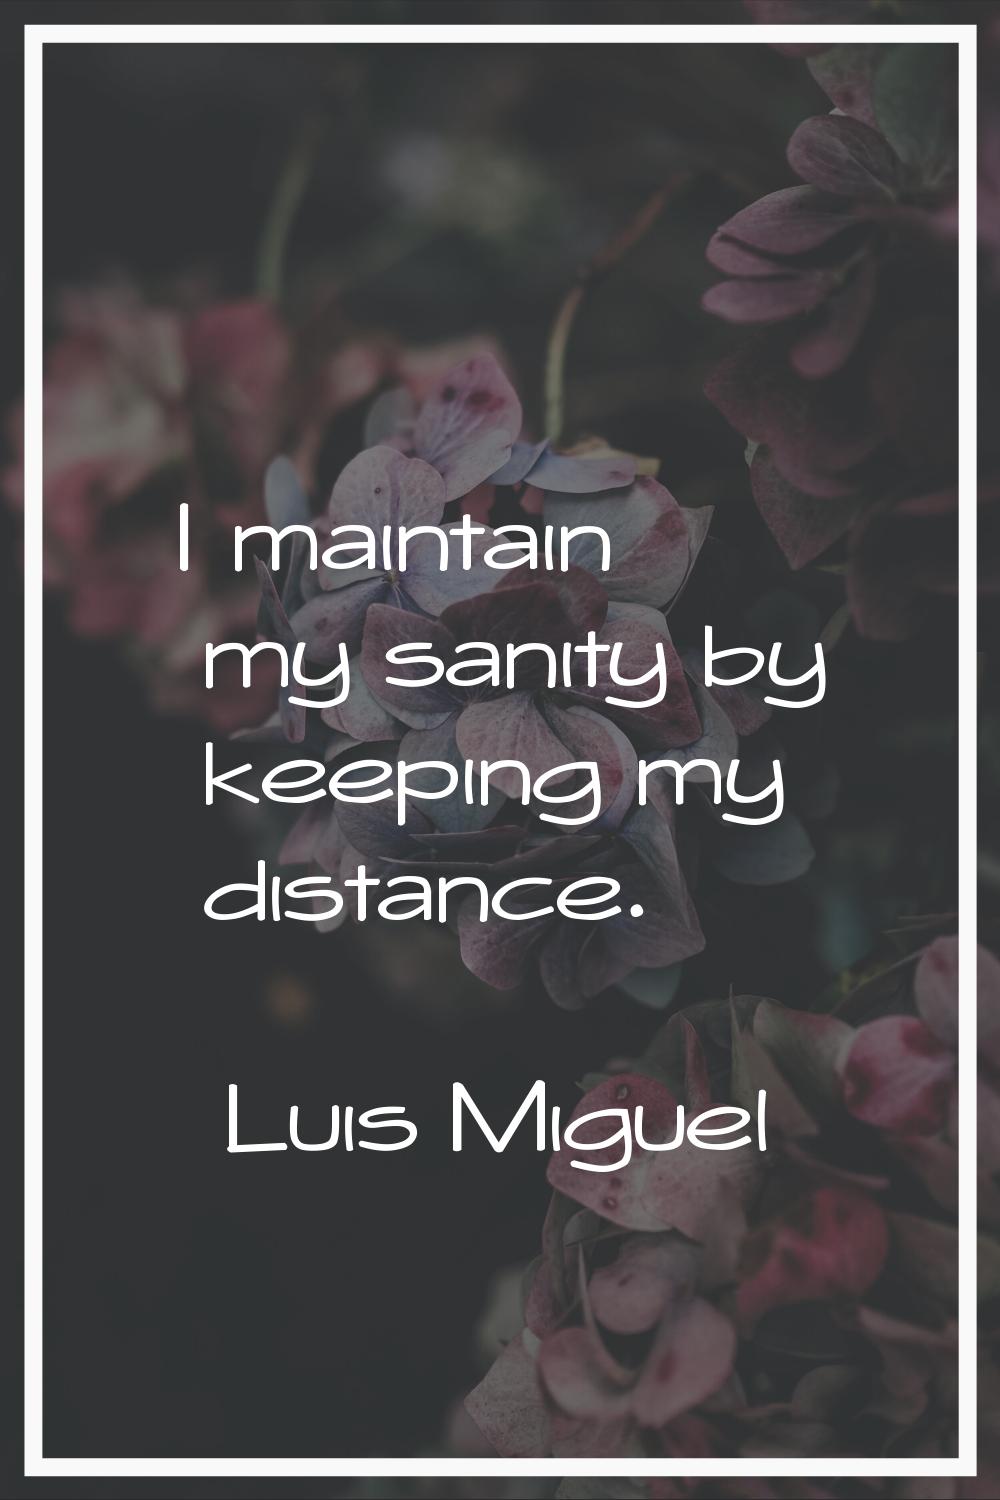 I maintain my sanity by keeping my distance.